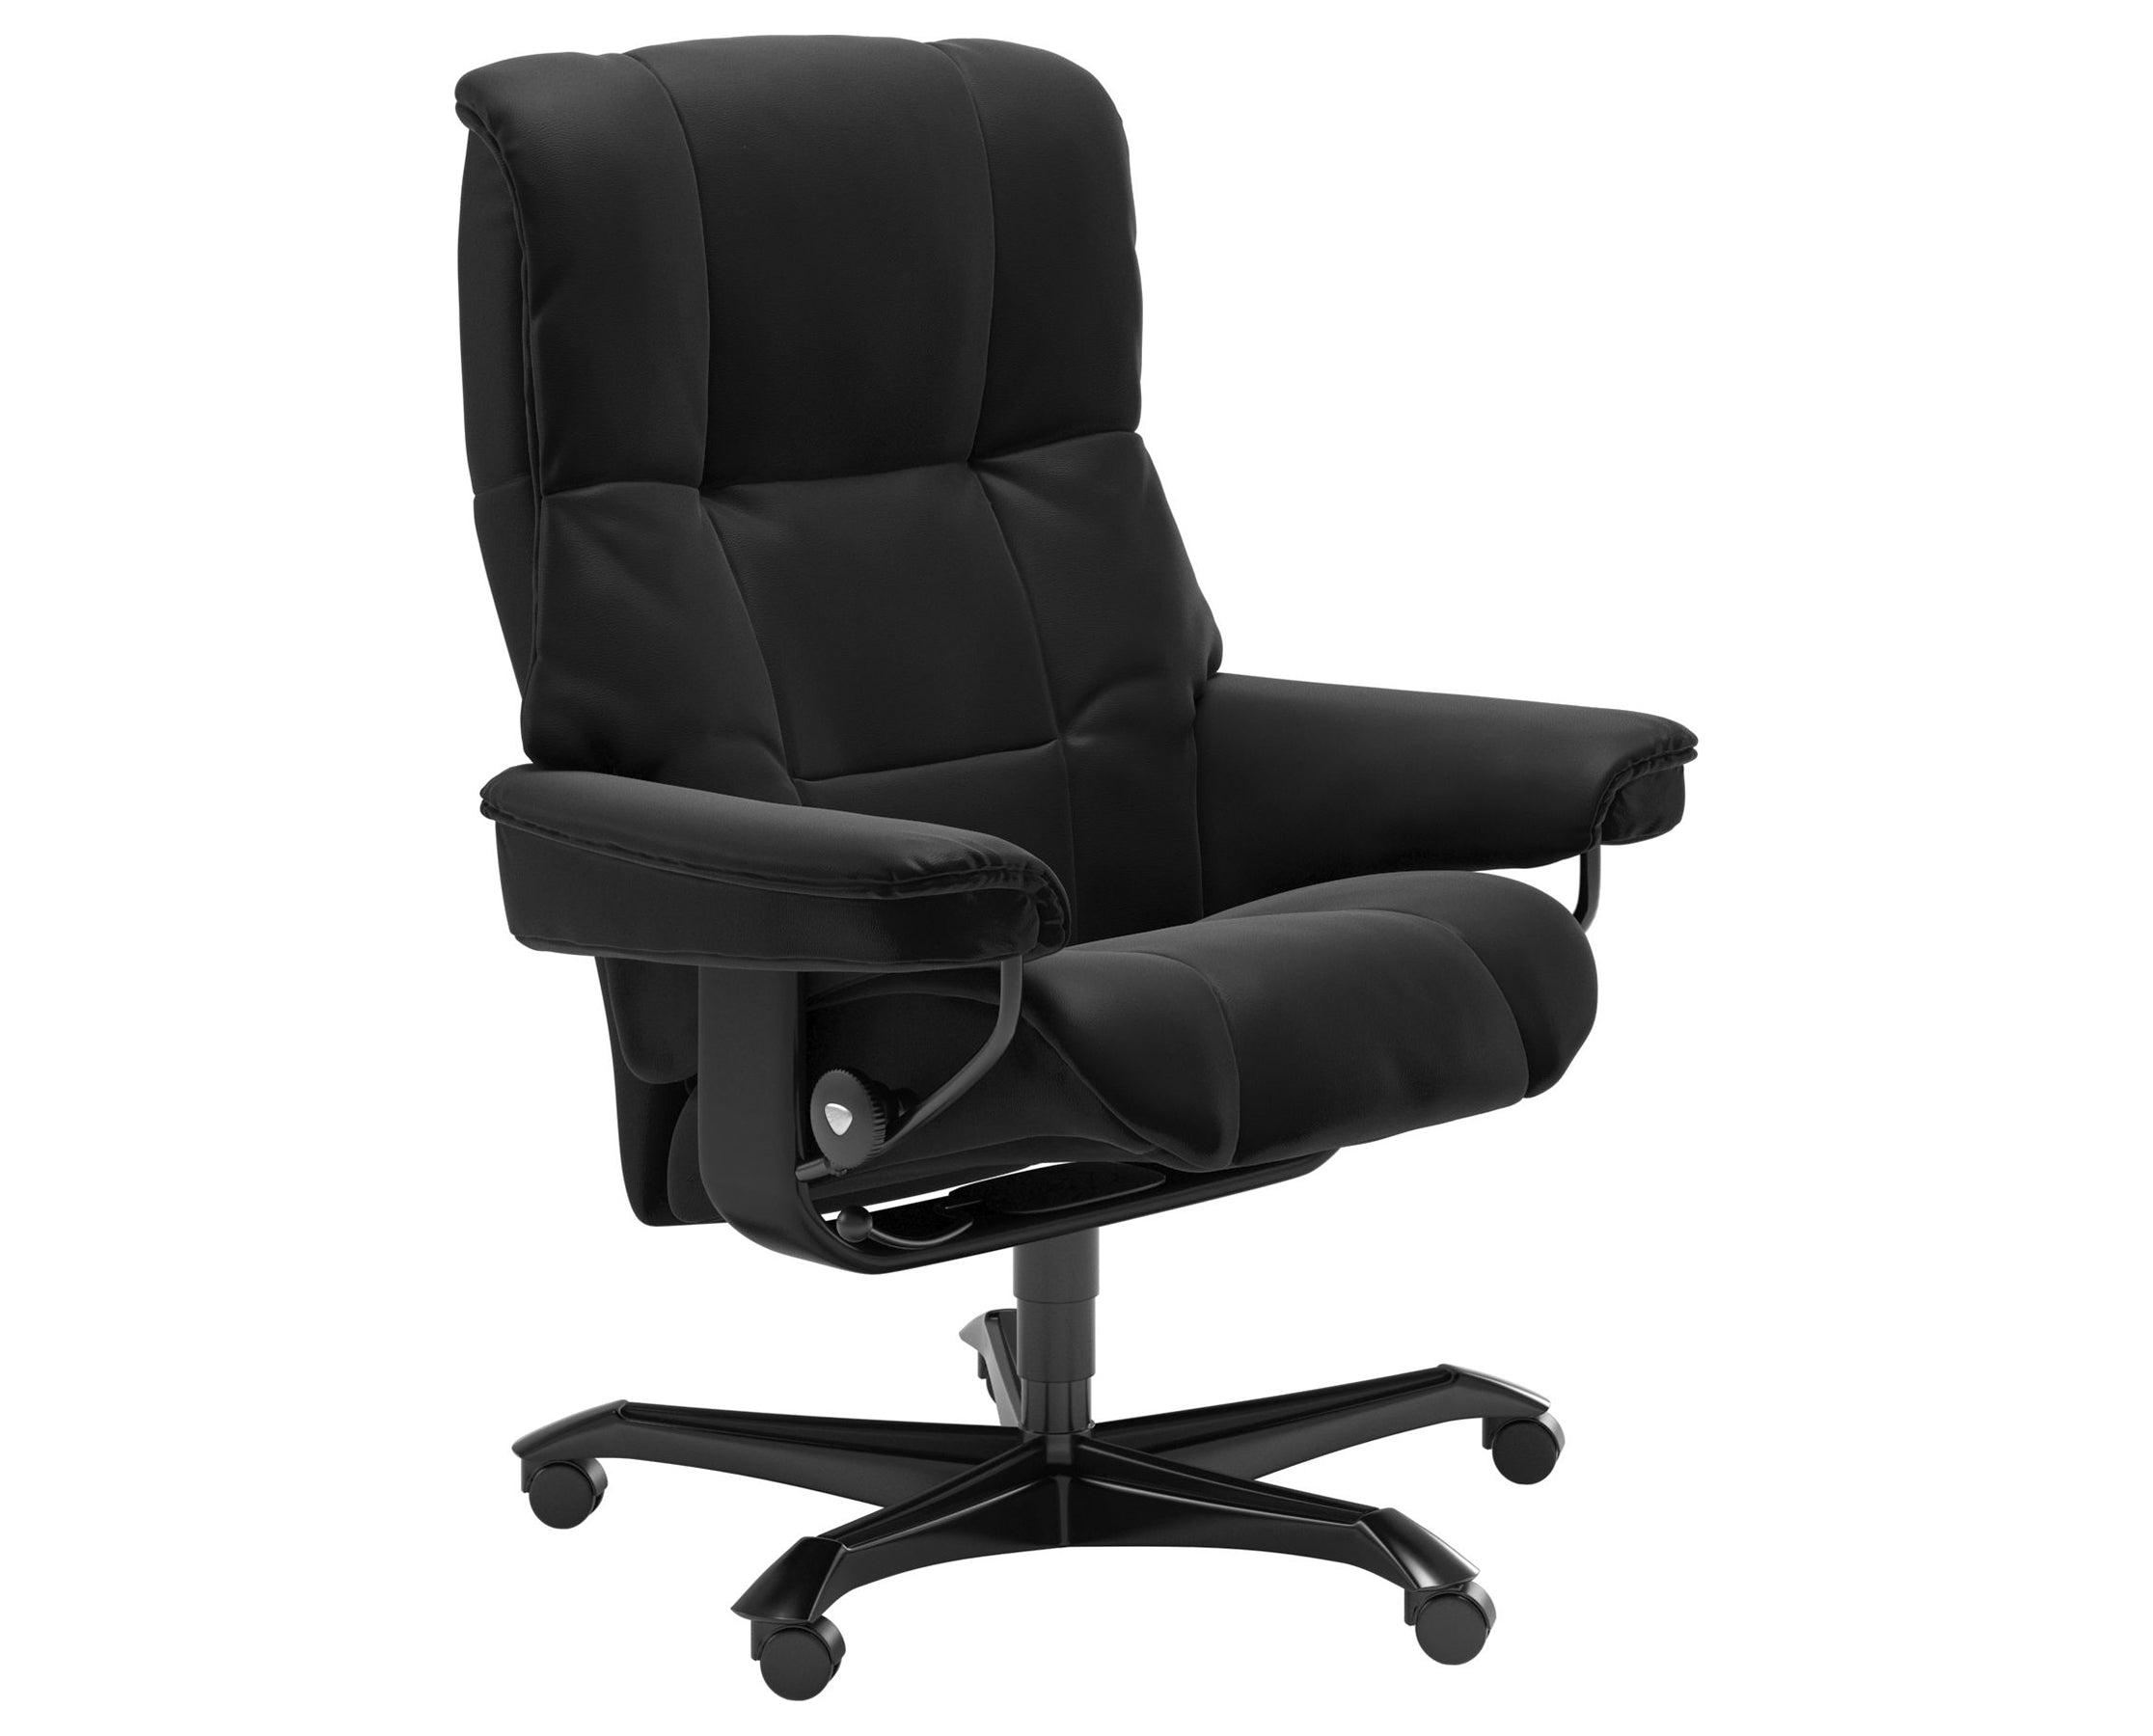 Paloma Leather Black M and Black Base | Stressless Mayfair Home Office Chair | Valley Ridge Furniture